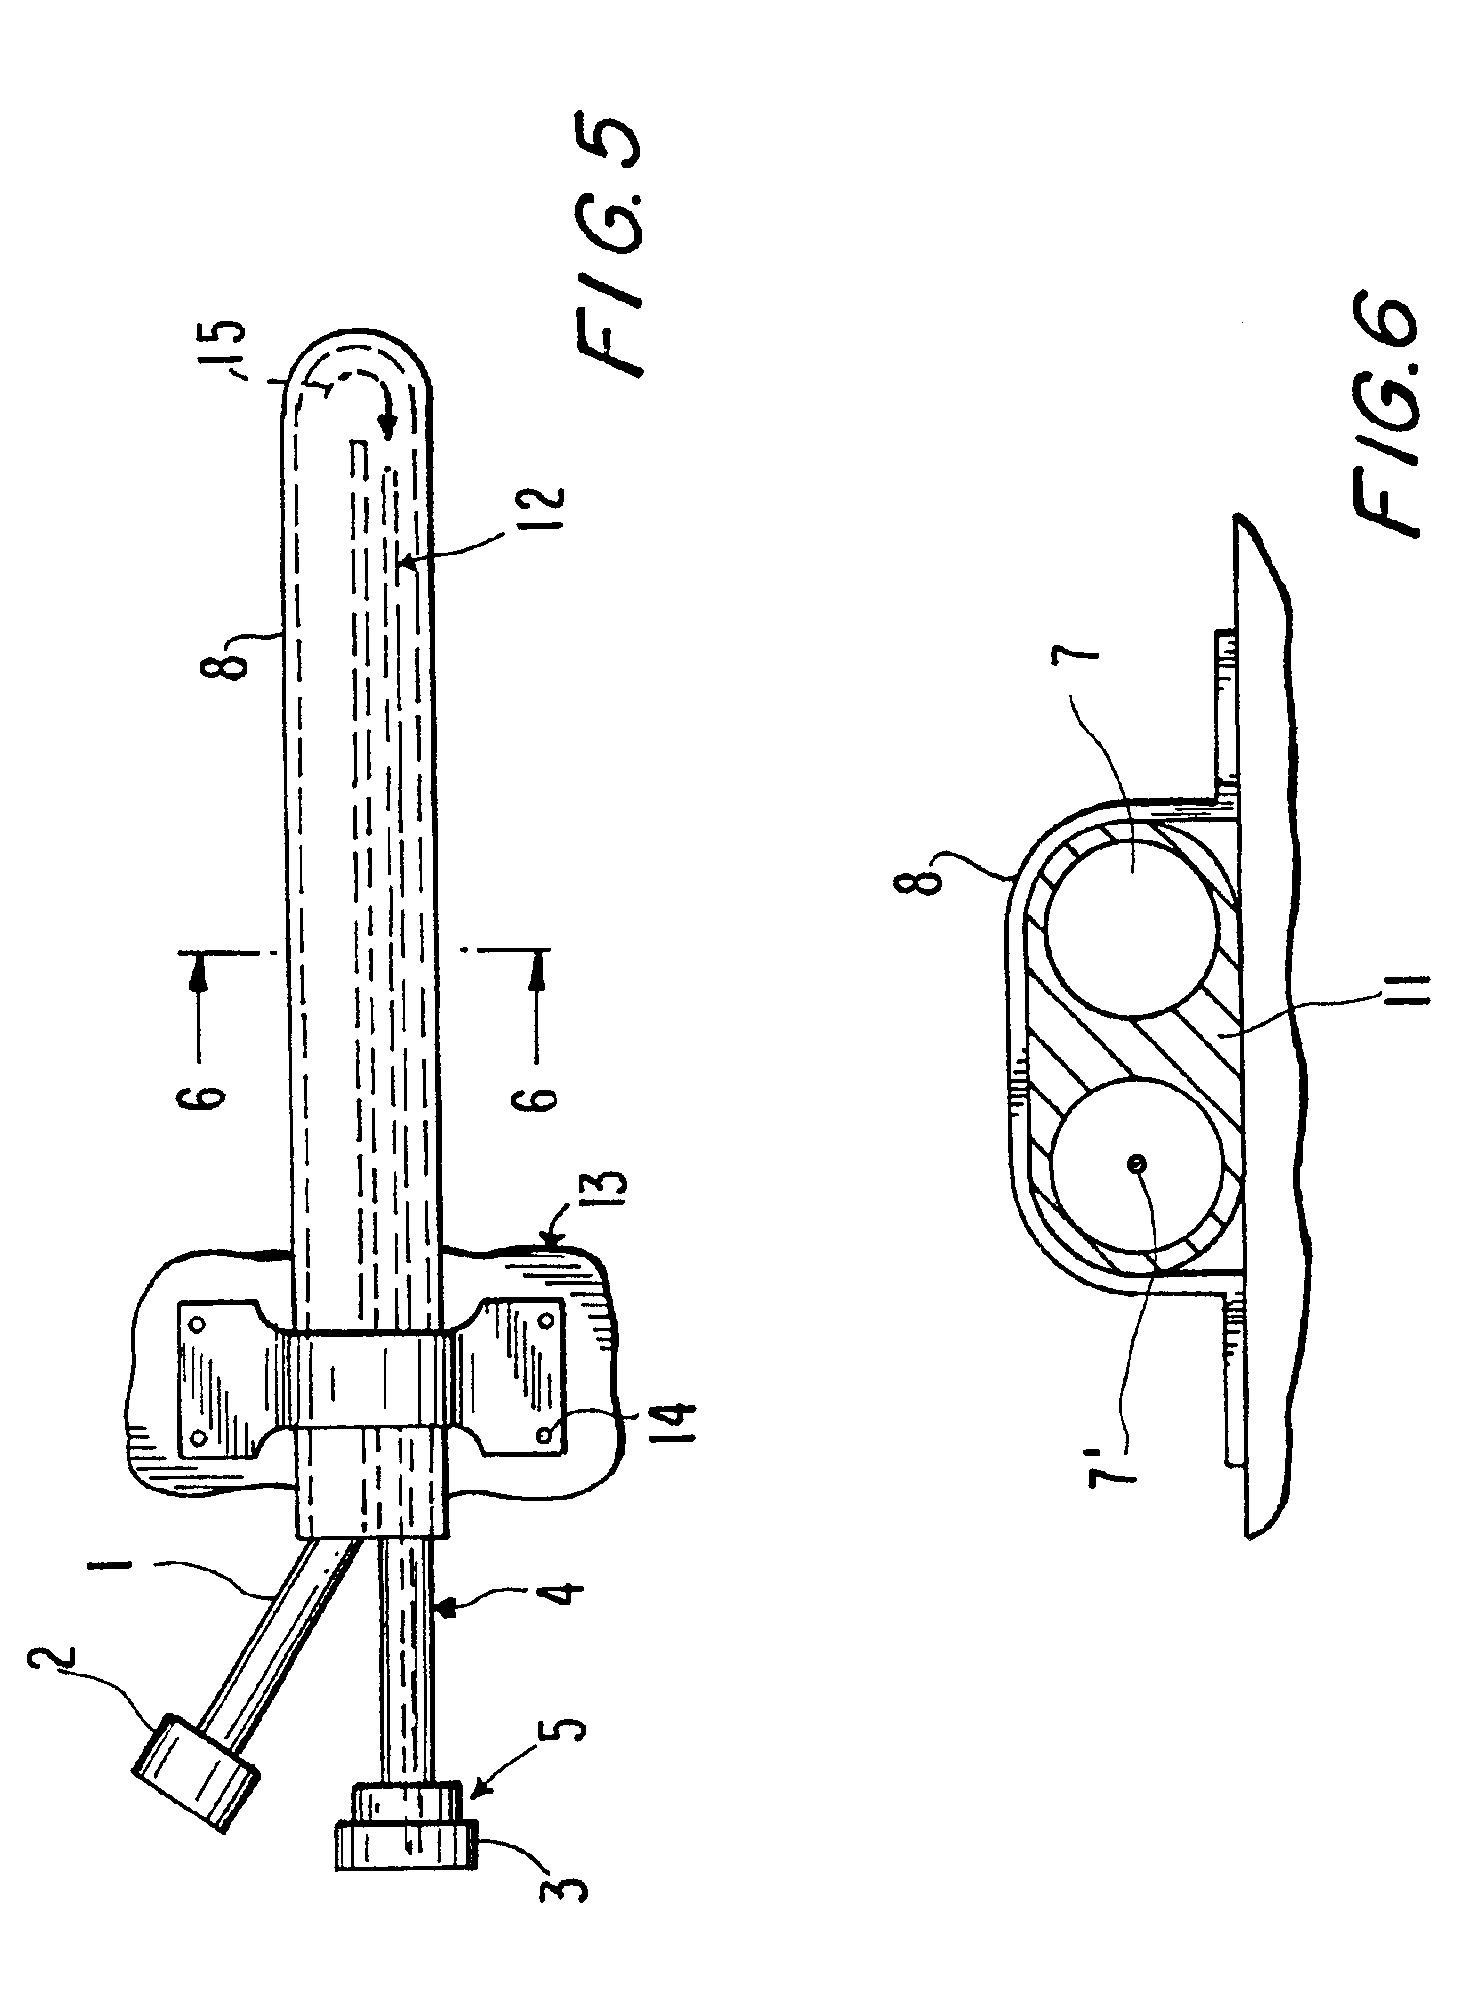 Method and device for intravascular plasma fluid removal